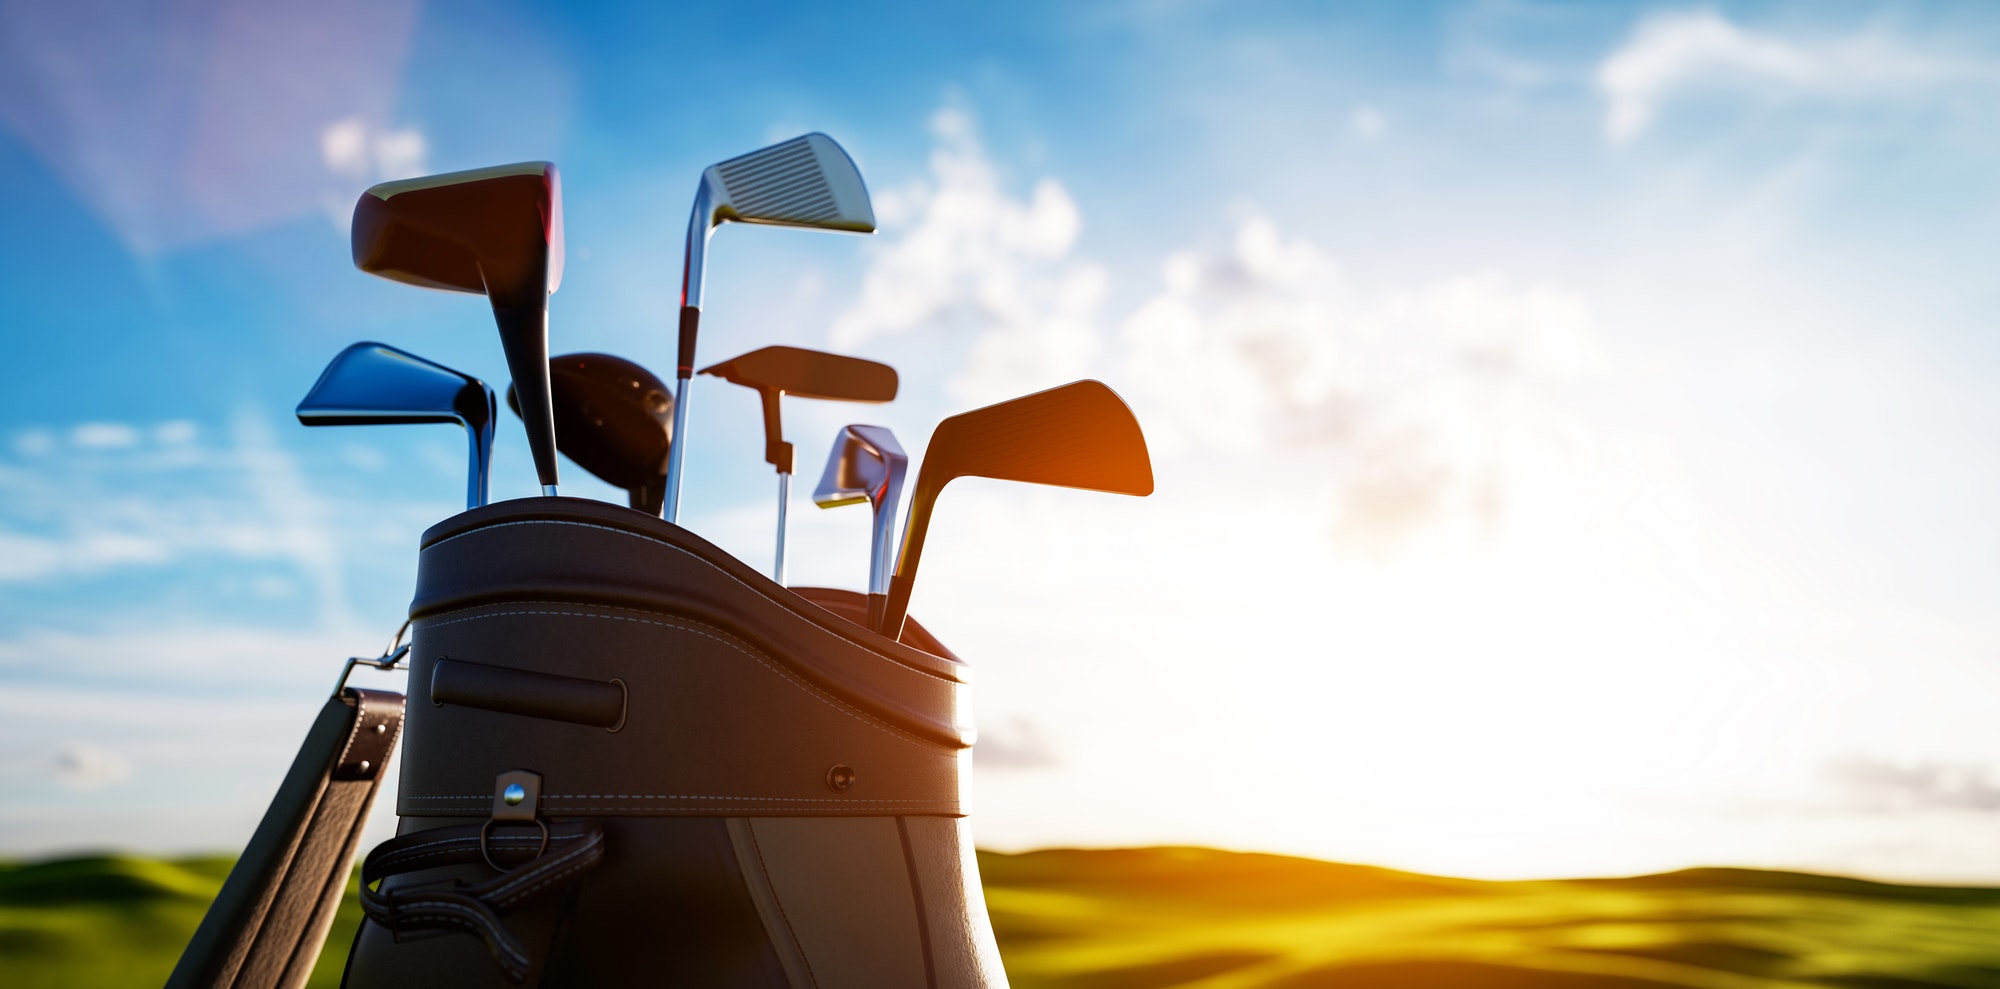 Golf clubs in bag at golf course resort